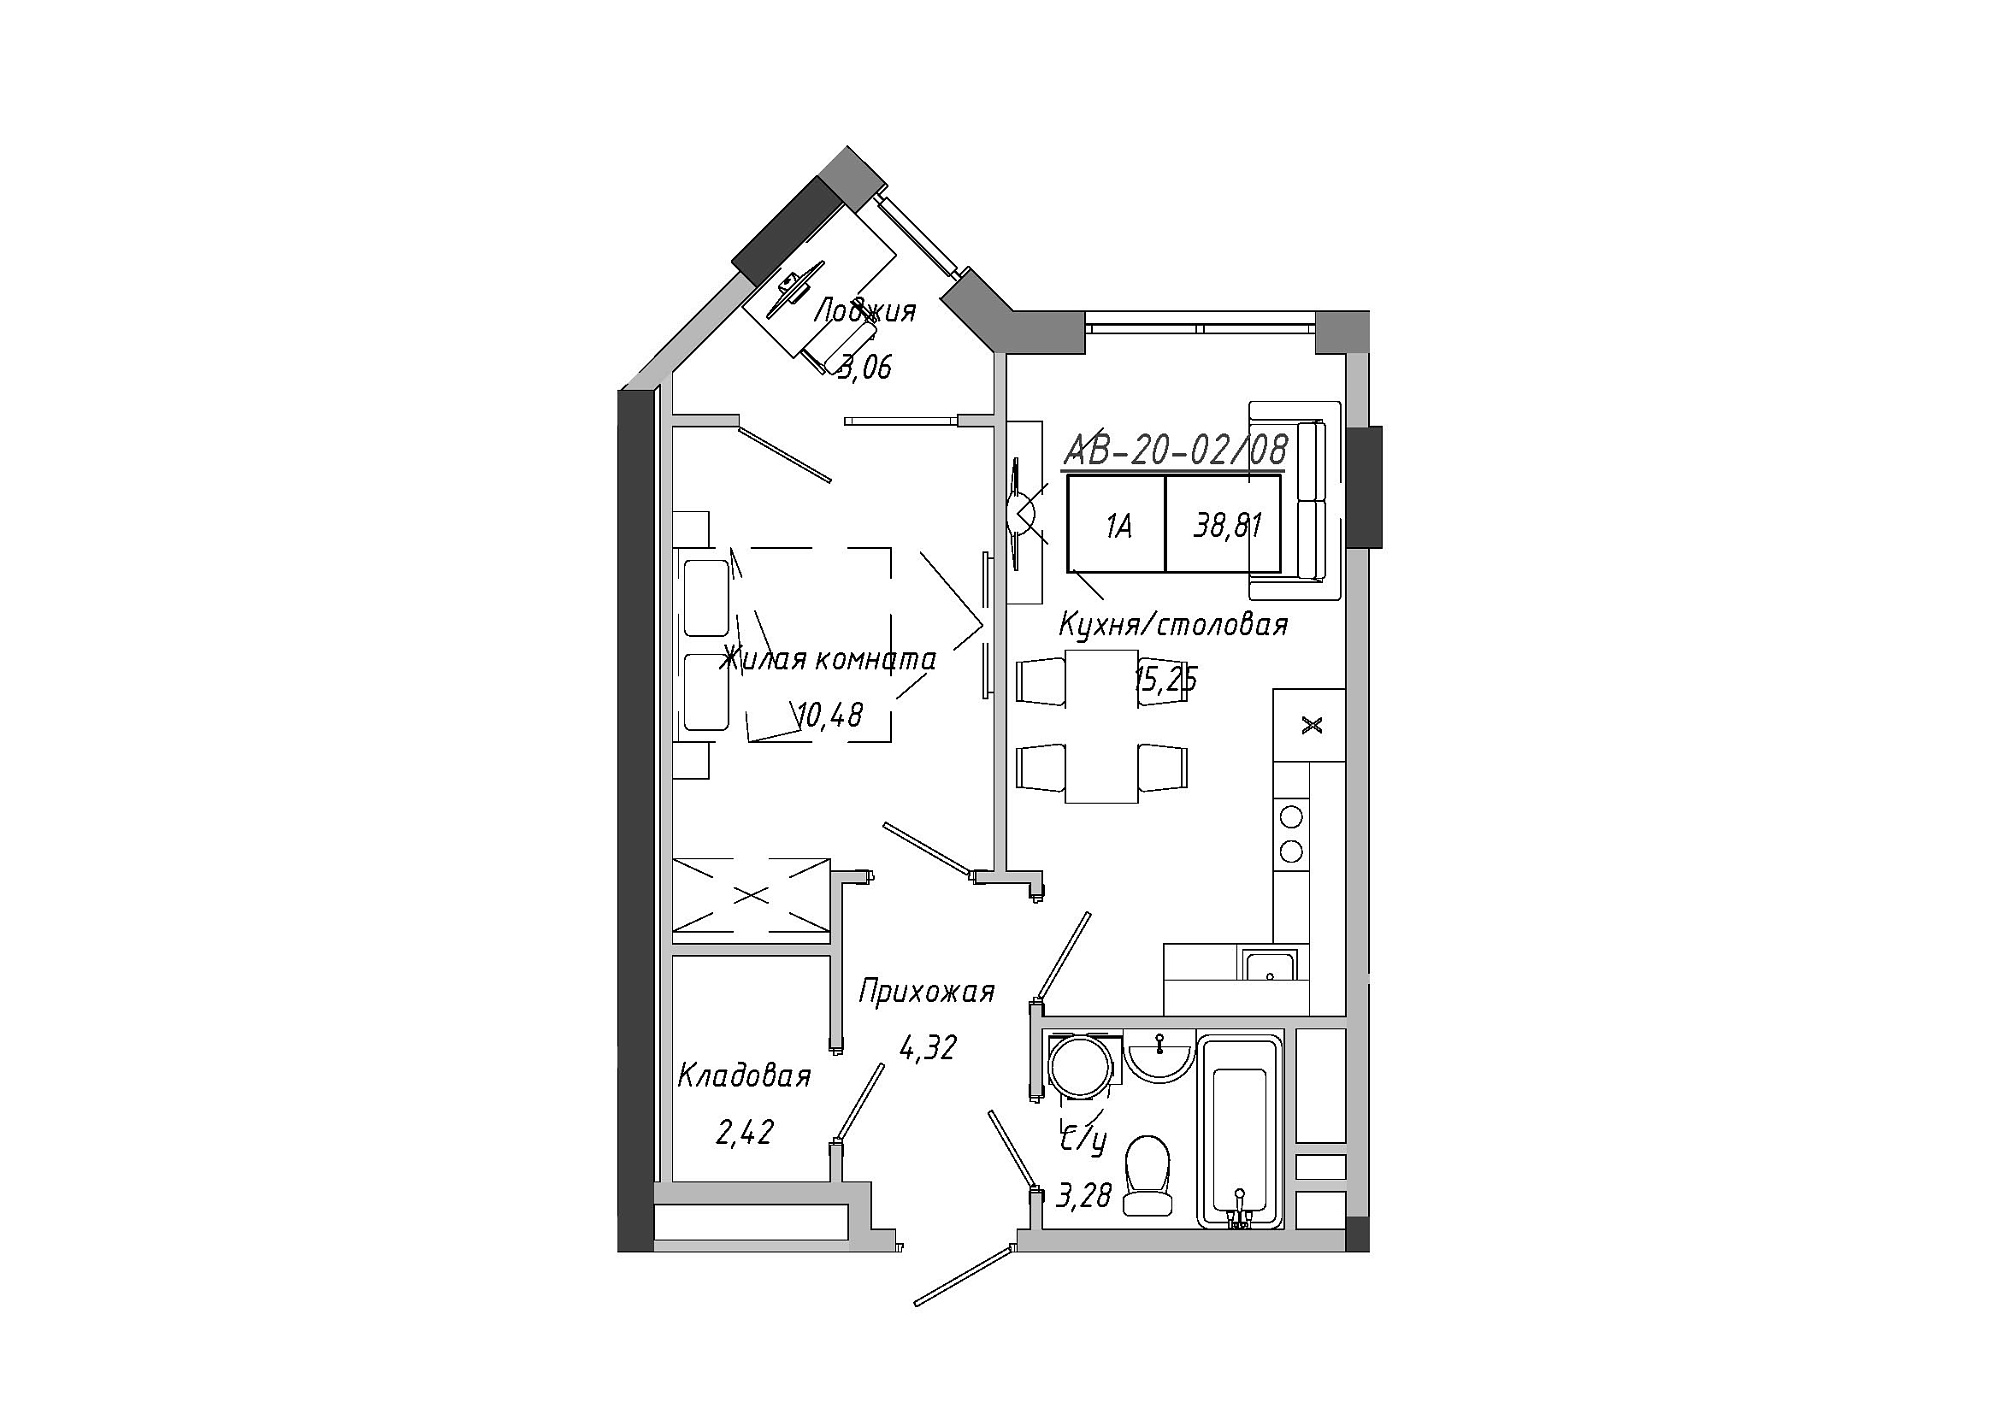 Planning 1-rm flats area 38.85m2, AB-20-02/00008.